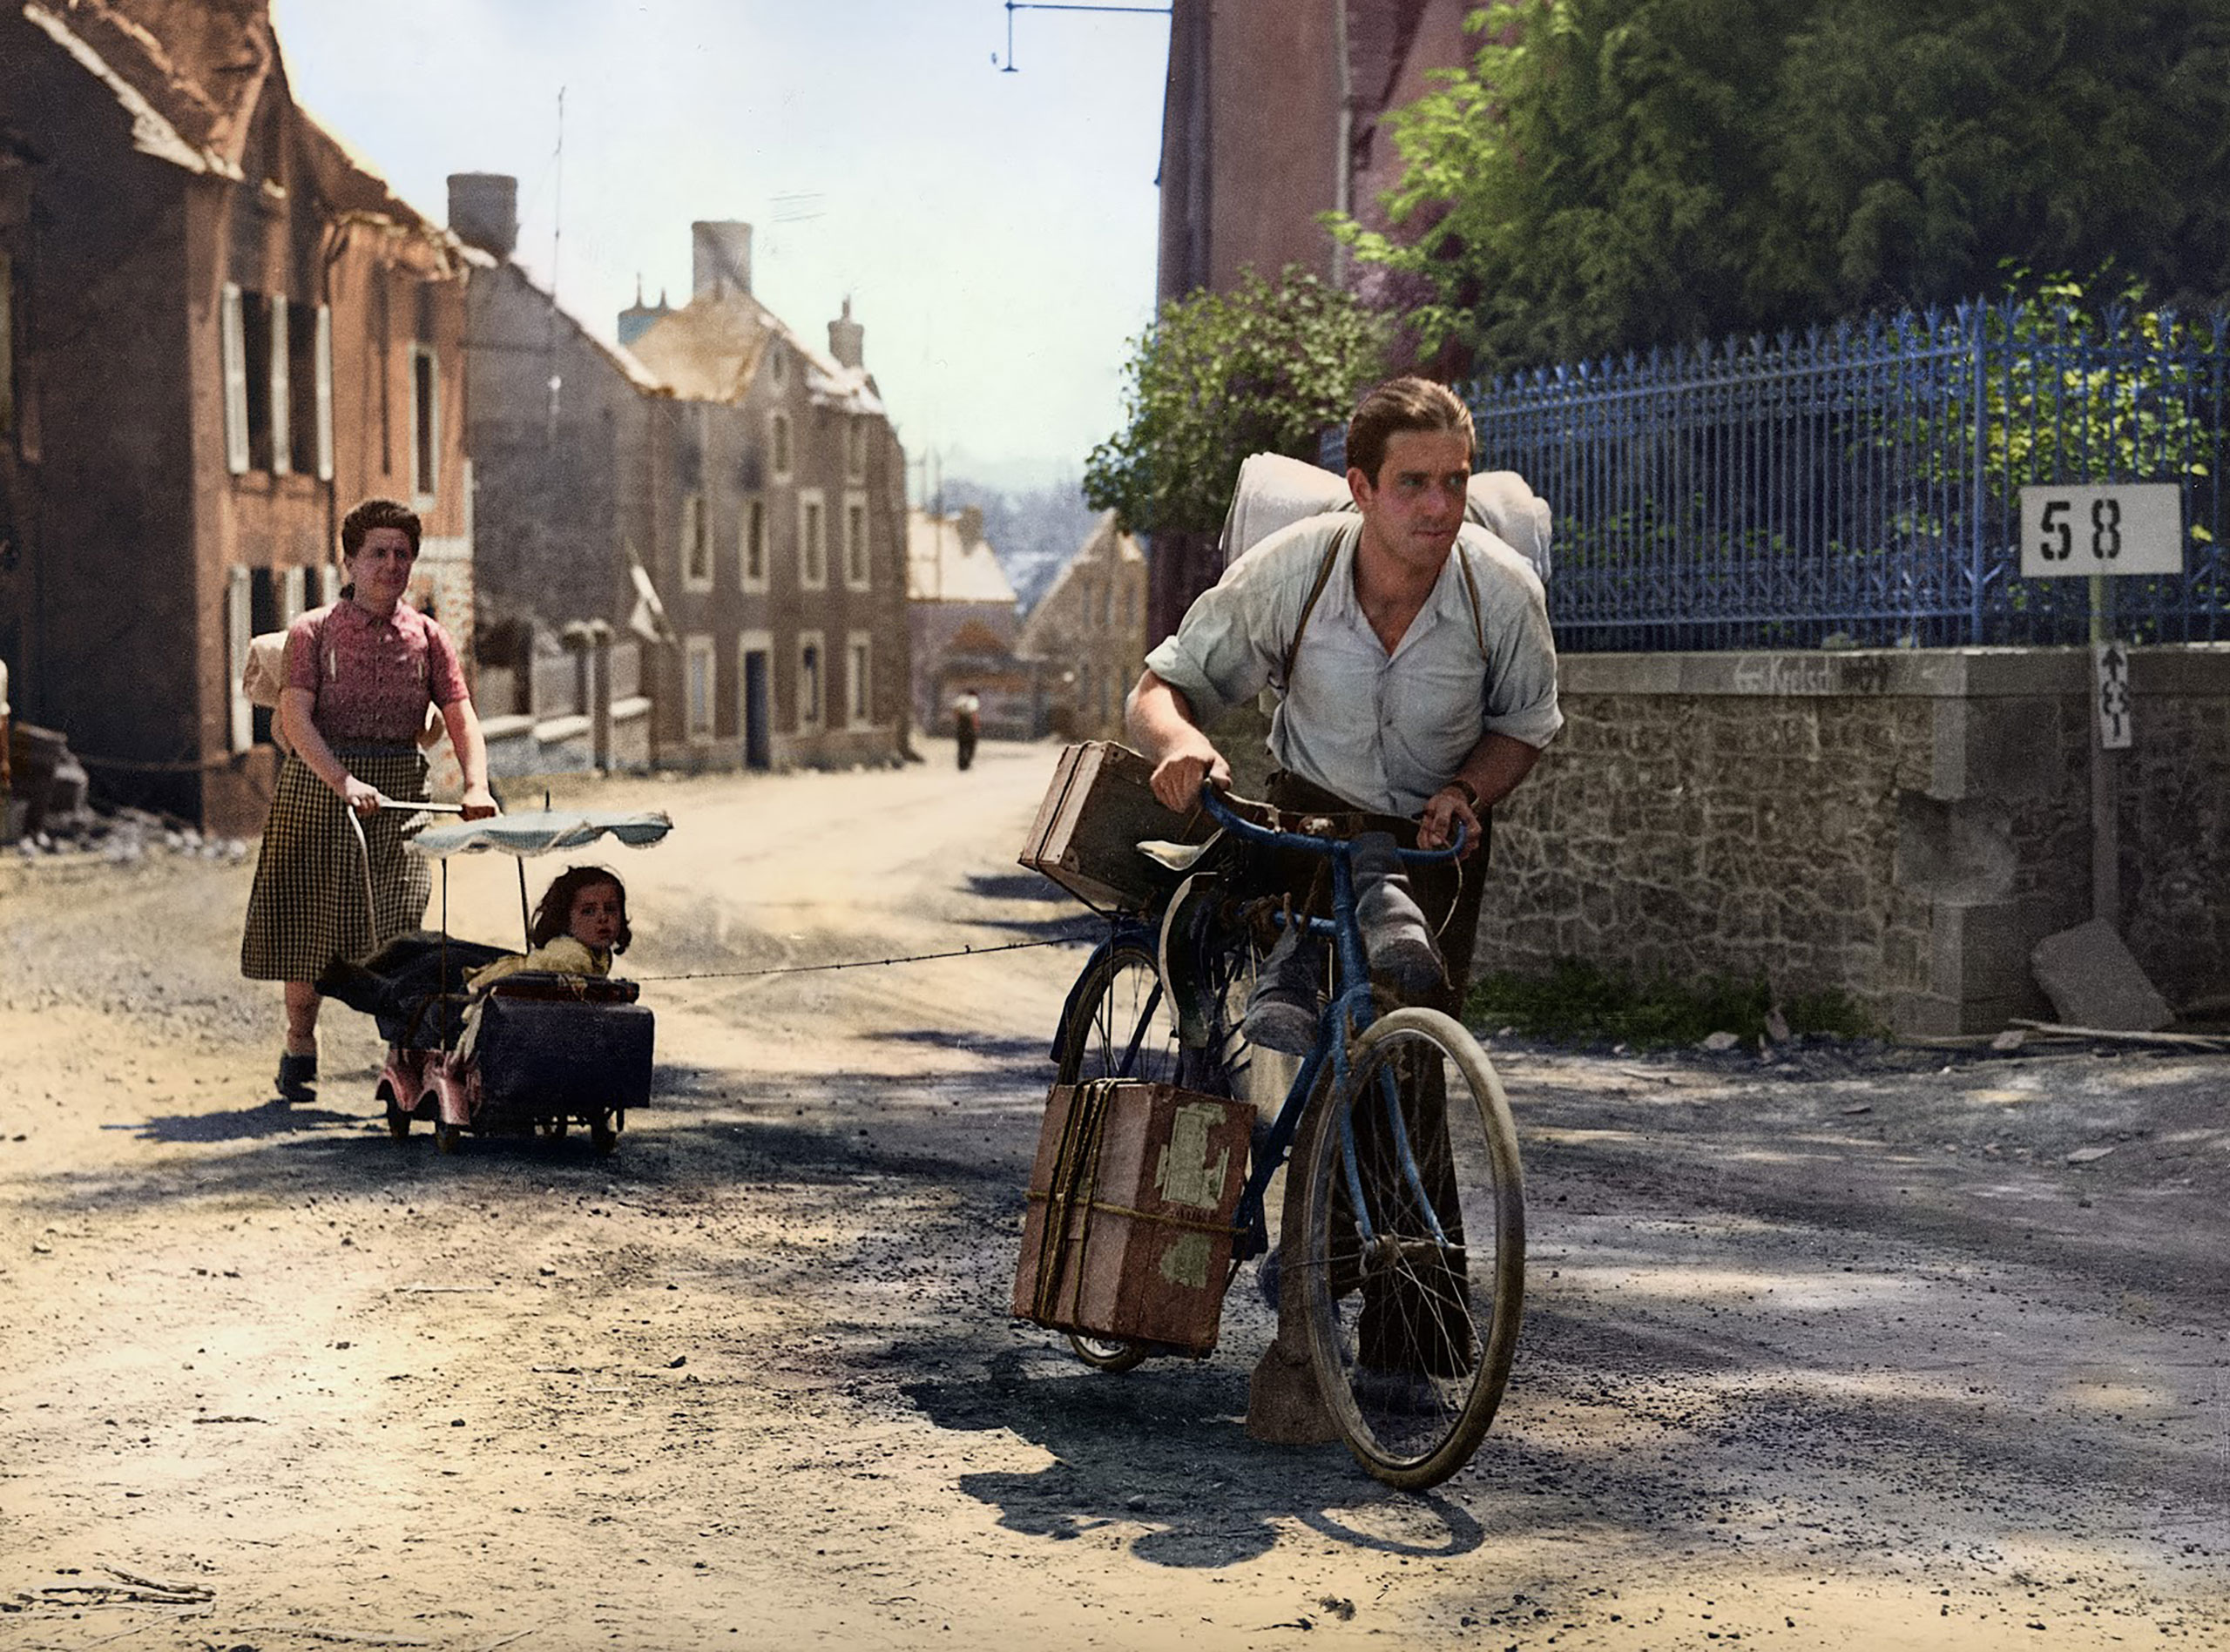 A man pulls a refugee's pram, attached by a cord to his bike, up a hill in Roncey, France on August 7, 1944.